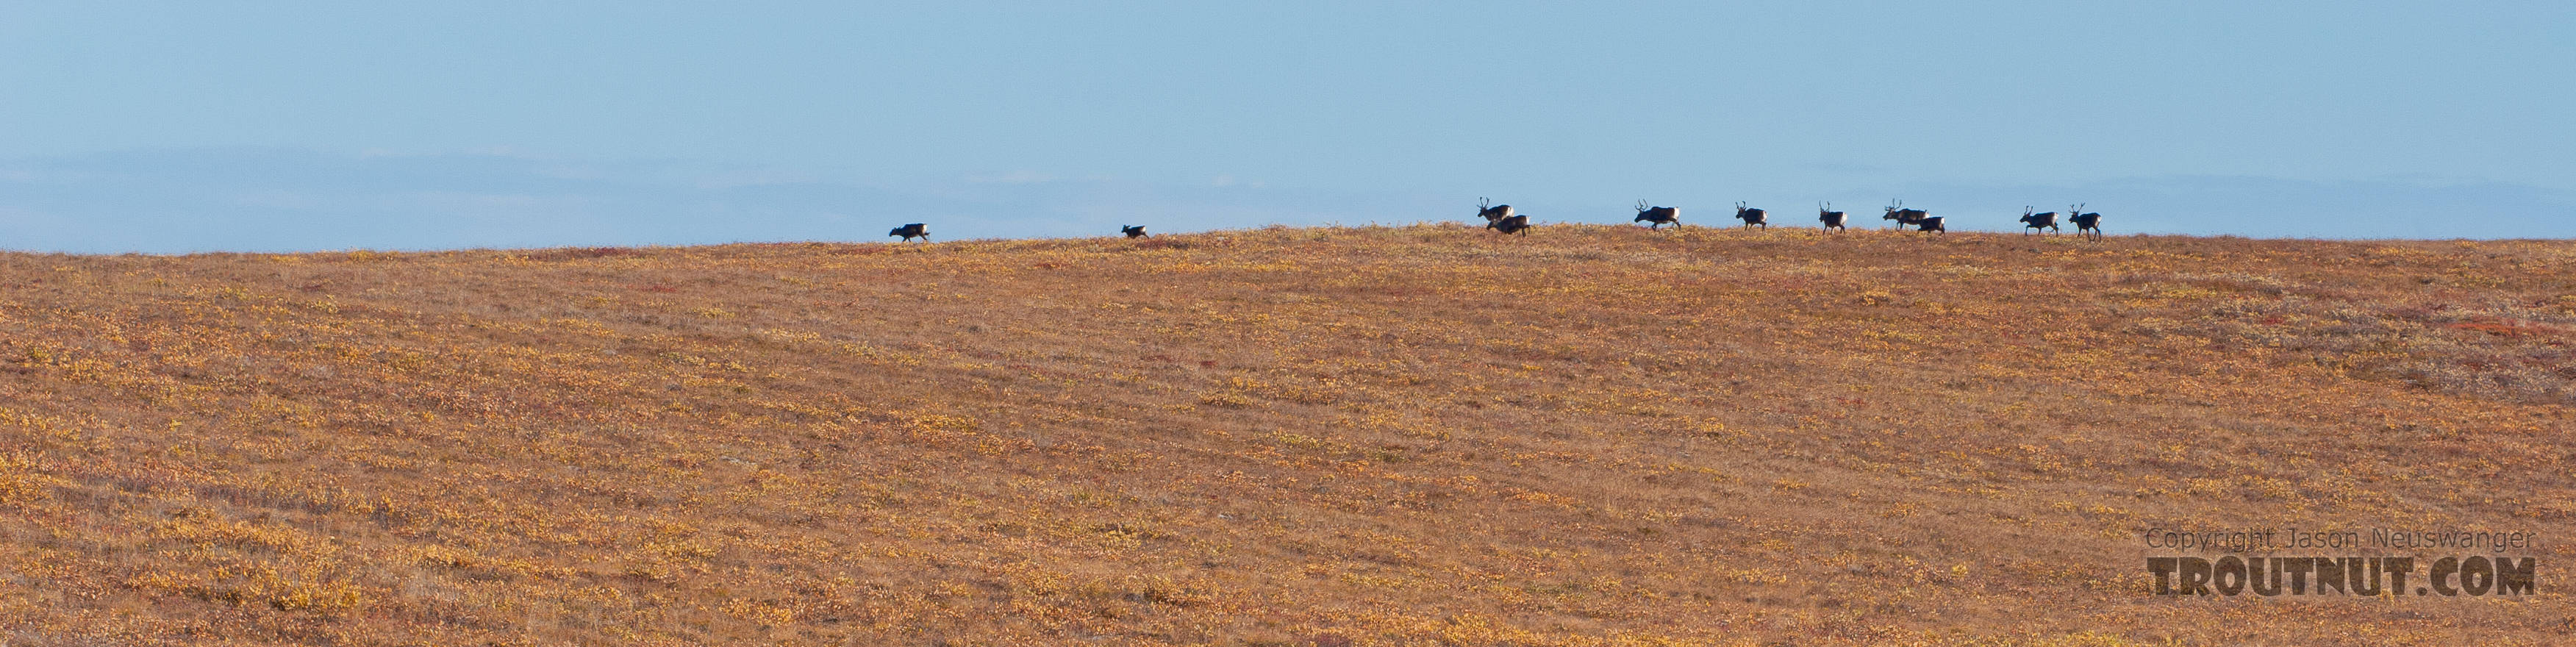 A herd of caribou (all cows) crossing over a hilltop near the Kuparuk River. From Dalton Highway in Alaska.